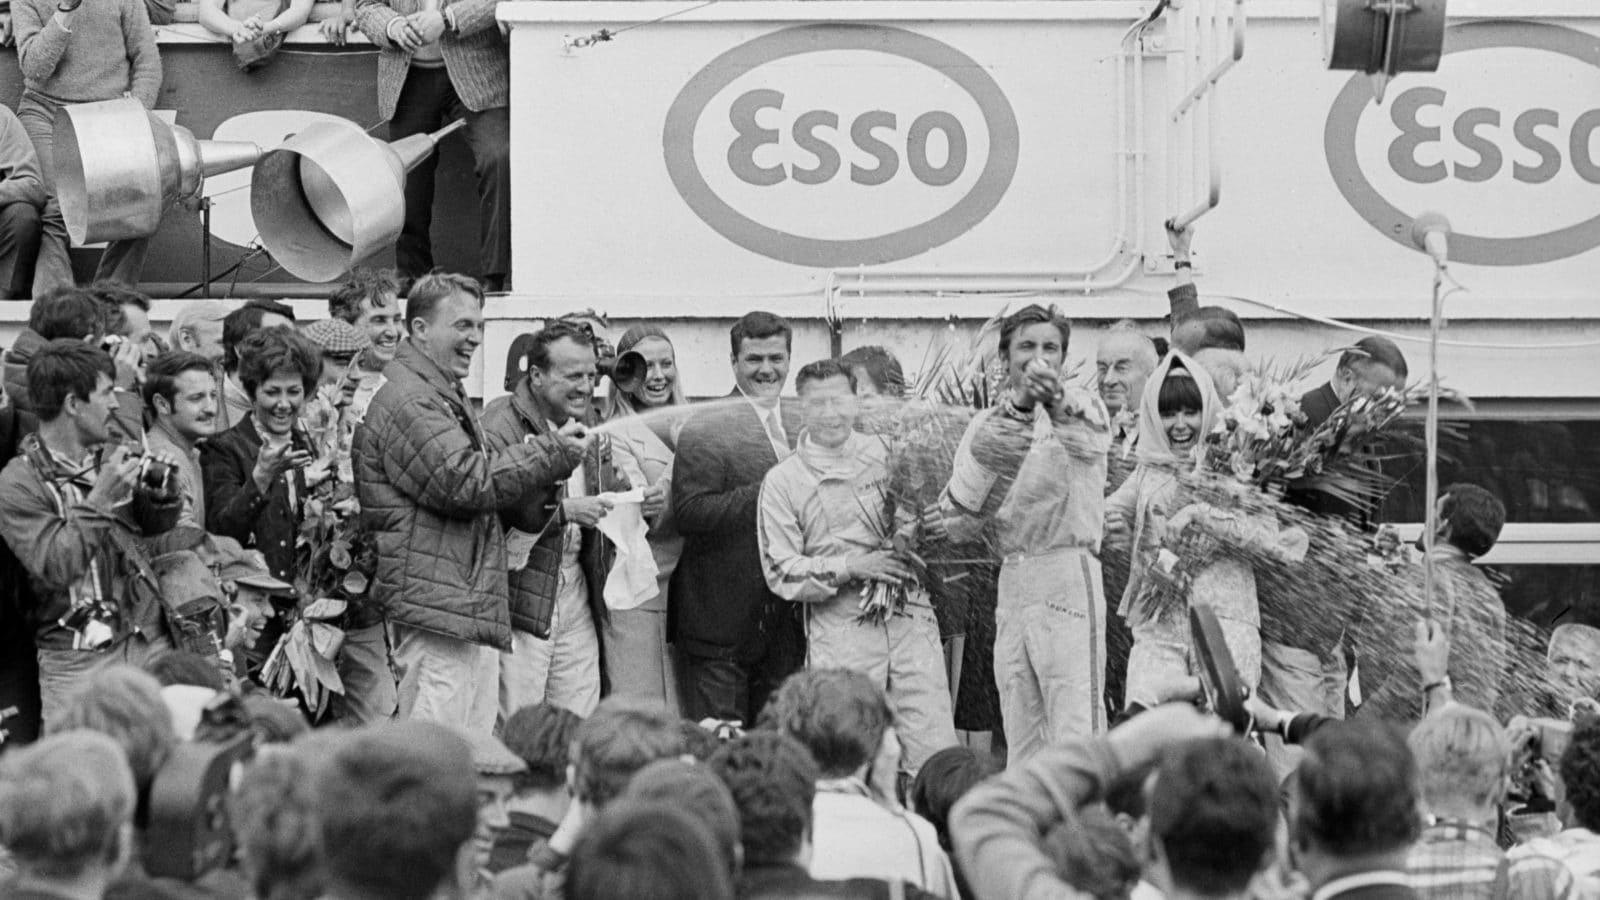 Dan-Gurney-and-AJ-Foyt-spray-champagne-on-the-podium-after-winning-the-1967-Le-Mans-24-Hours